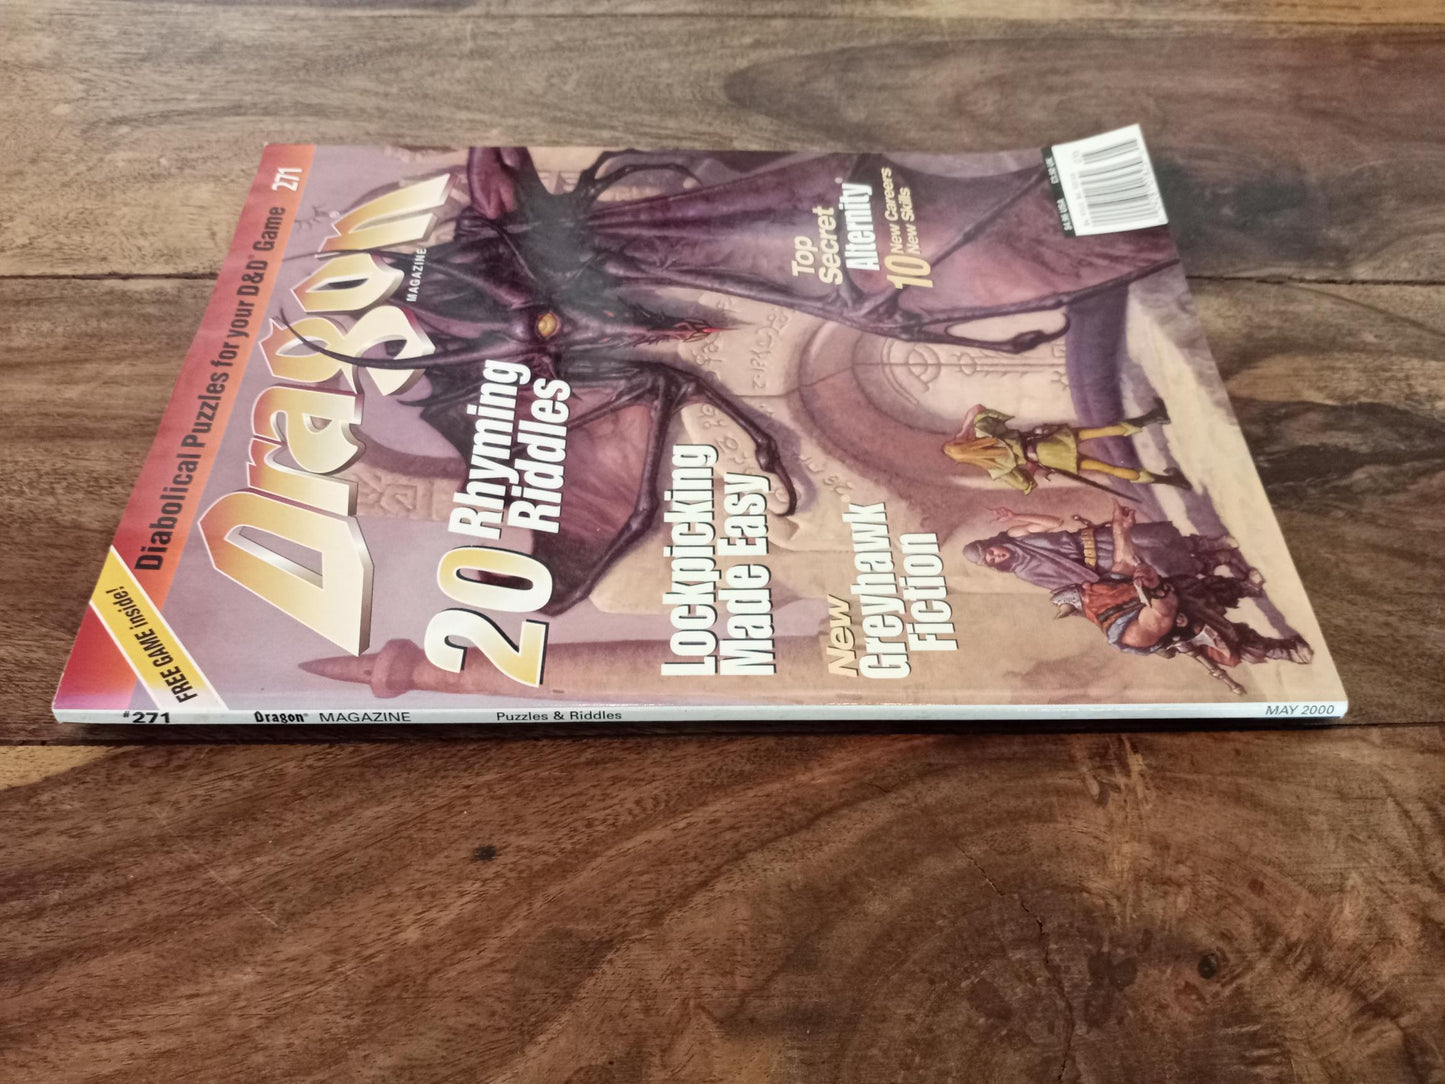 Dragon Magazine #271 With Inserts May 2000 TSR AD&D